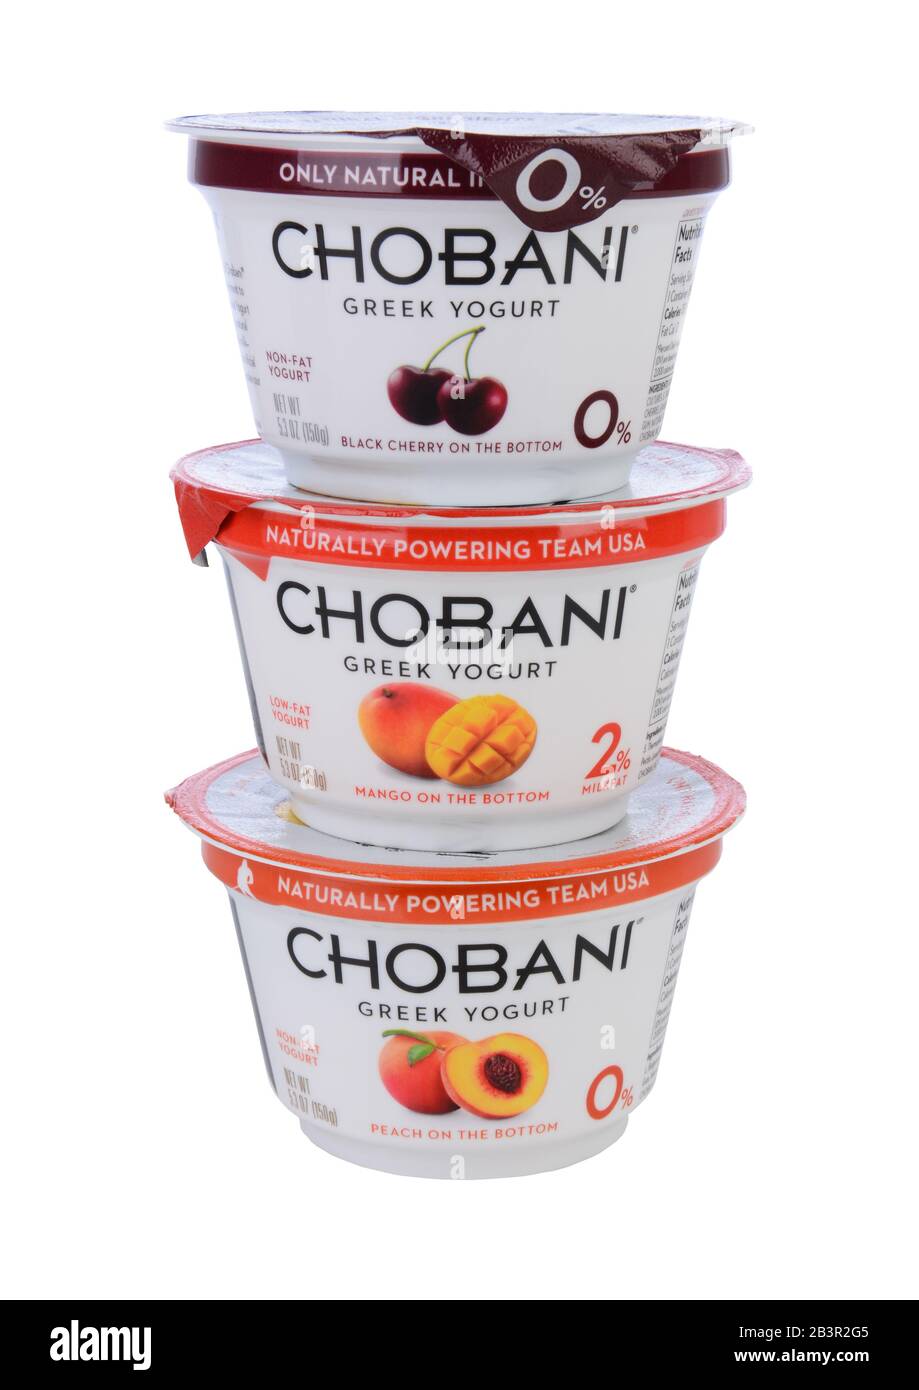 https://c8.alamy.com/comp/2B3R2G5/irvine-ca-may-20-2014-3-cups-of-chobani-greek-yogurt-chobani-is-an-american-brand-launched-in-2007-and-has-become-one-of-the-worlds-leading-you-2B3R2G5.jpg